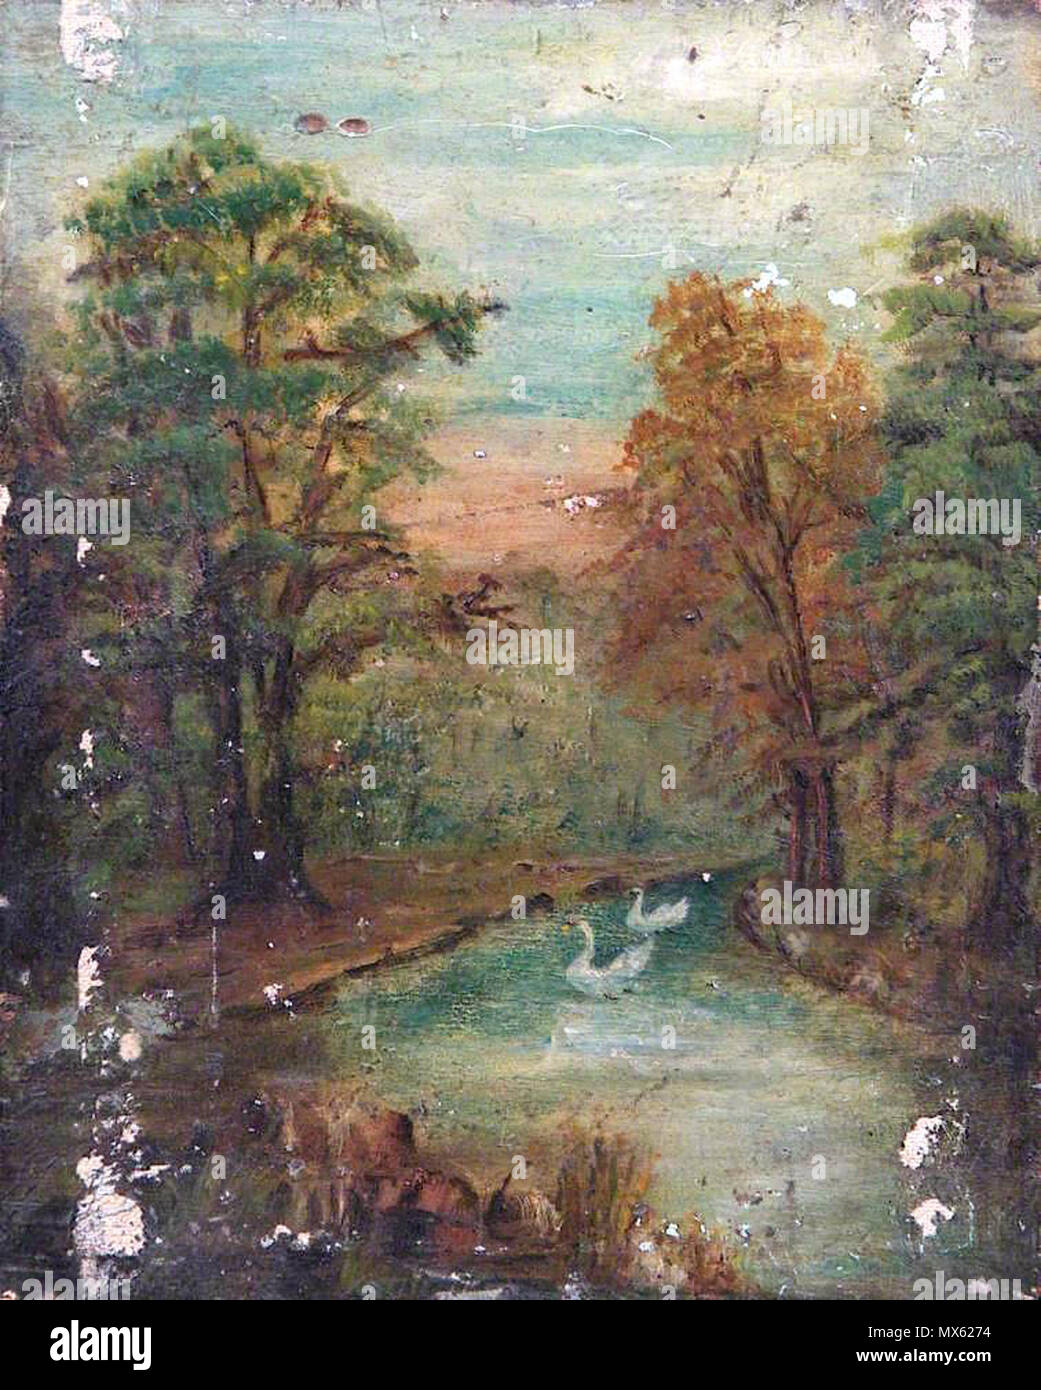 English Trees A Lake And Swans Wandsworth Museum United Kingdom London Dates Date Unknown Dimensions Height